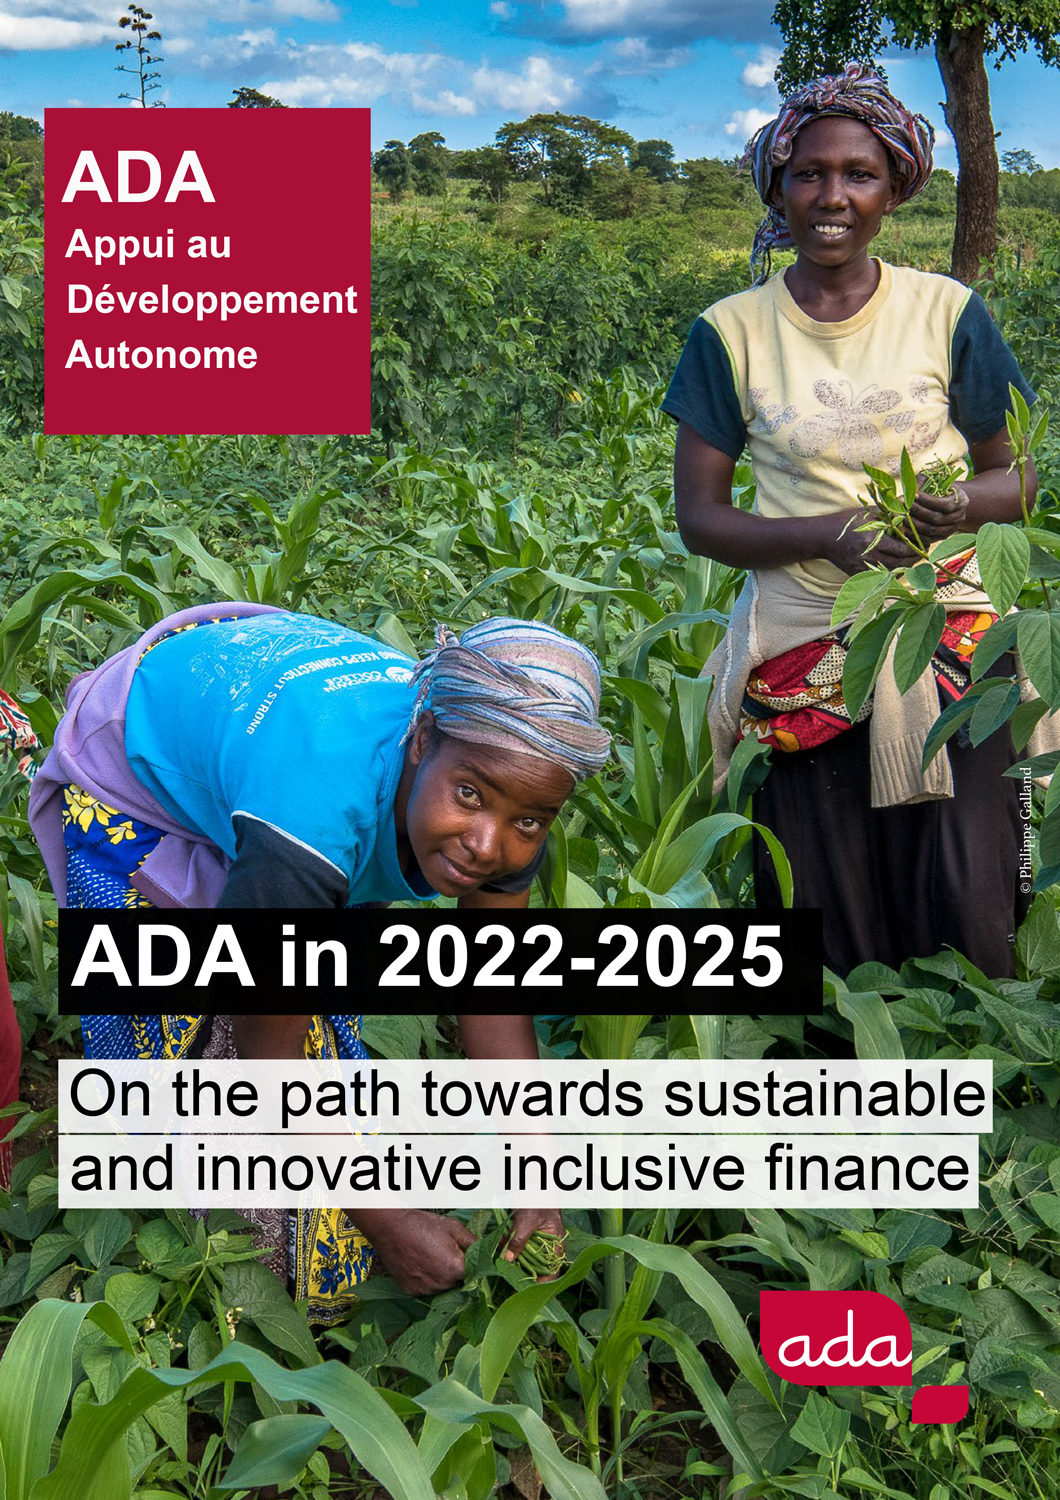 On the path towards sustainable and innovative inclusive finance (long version)